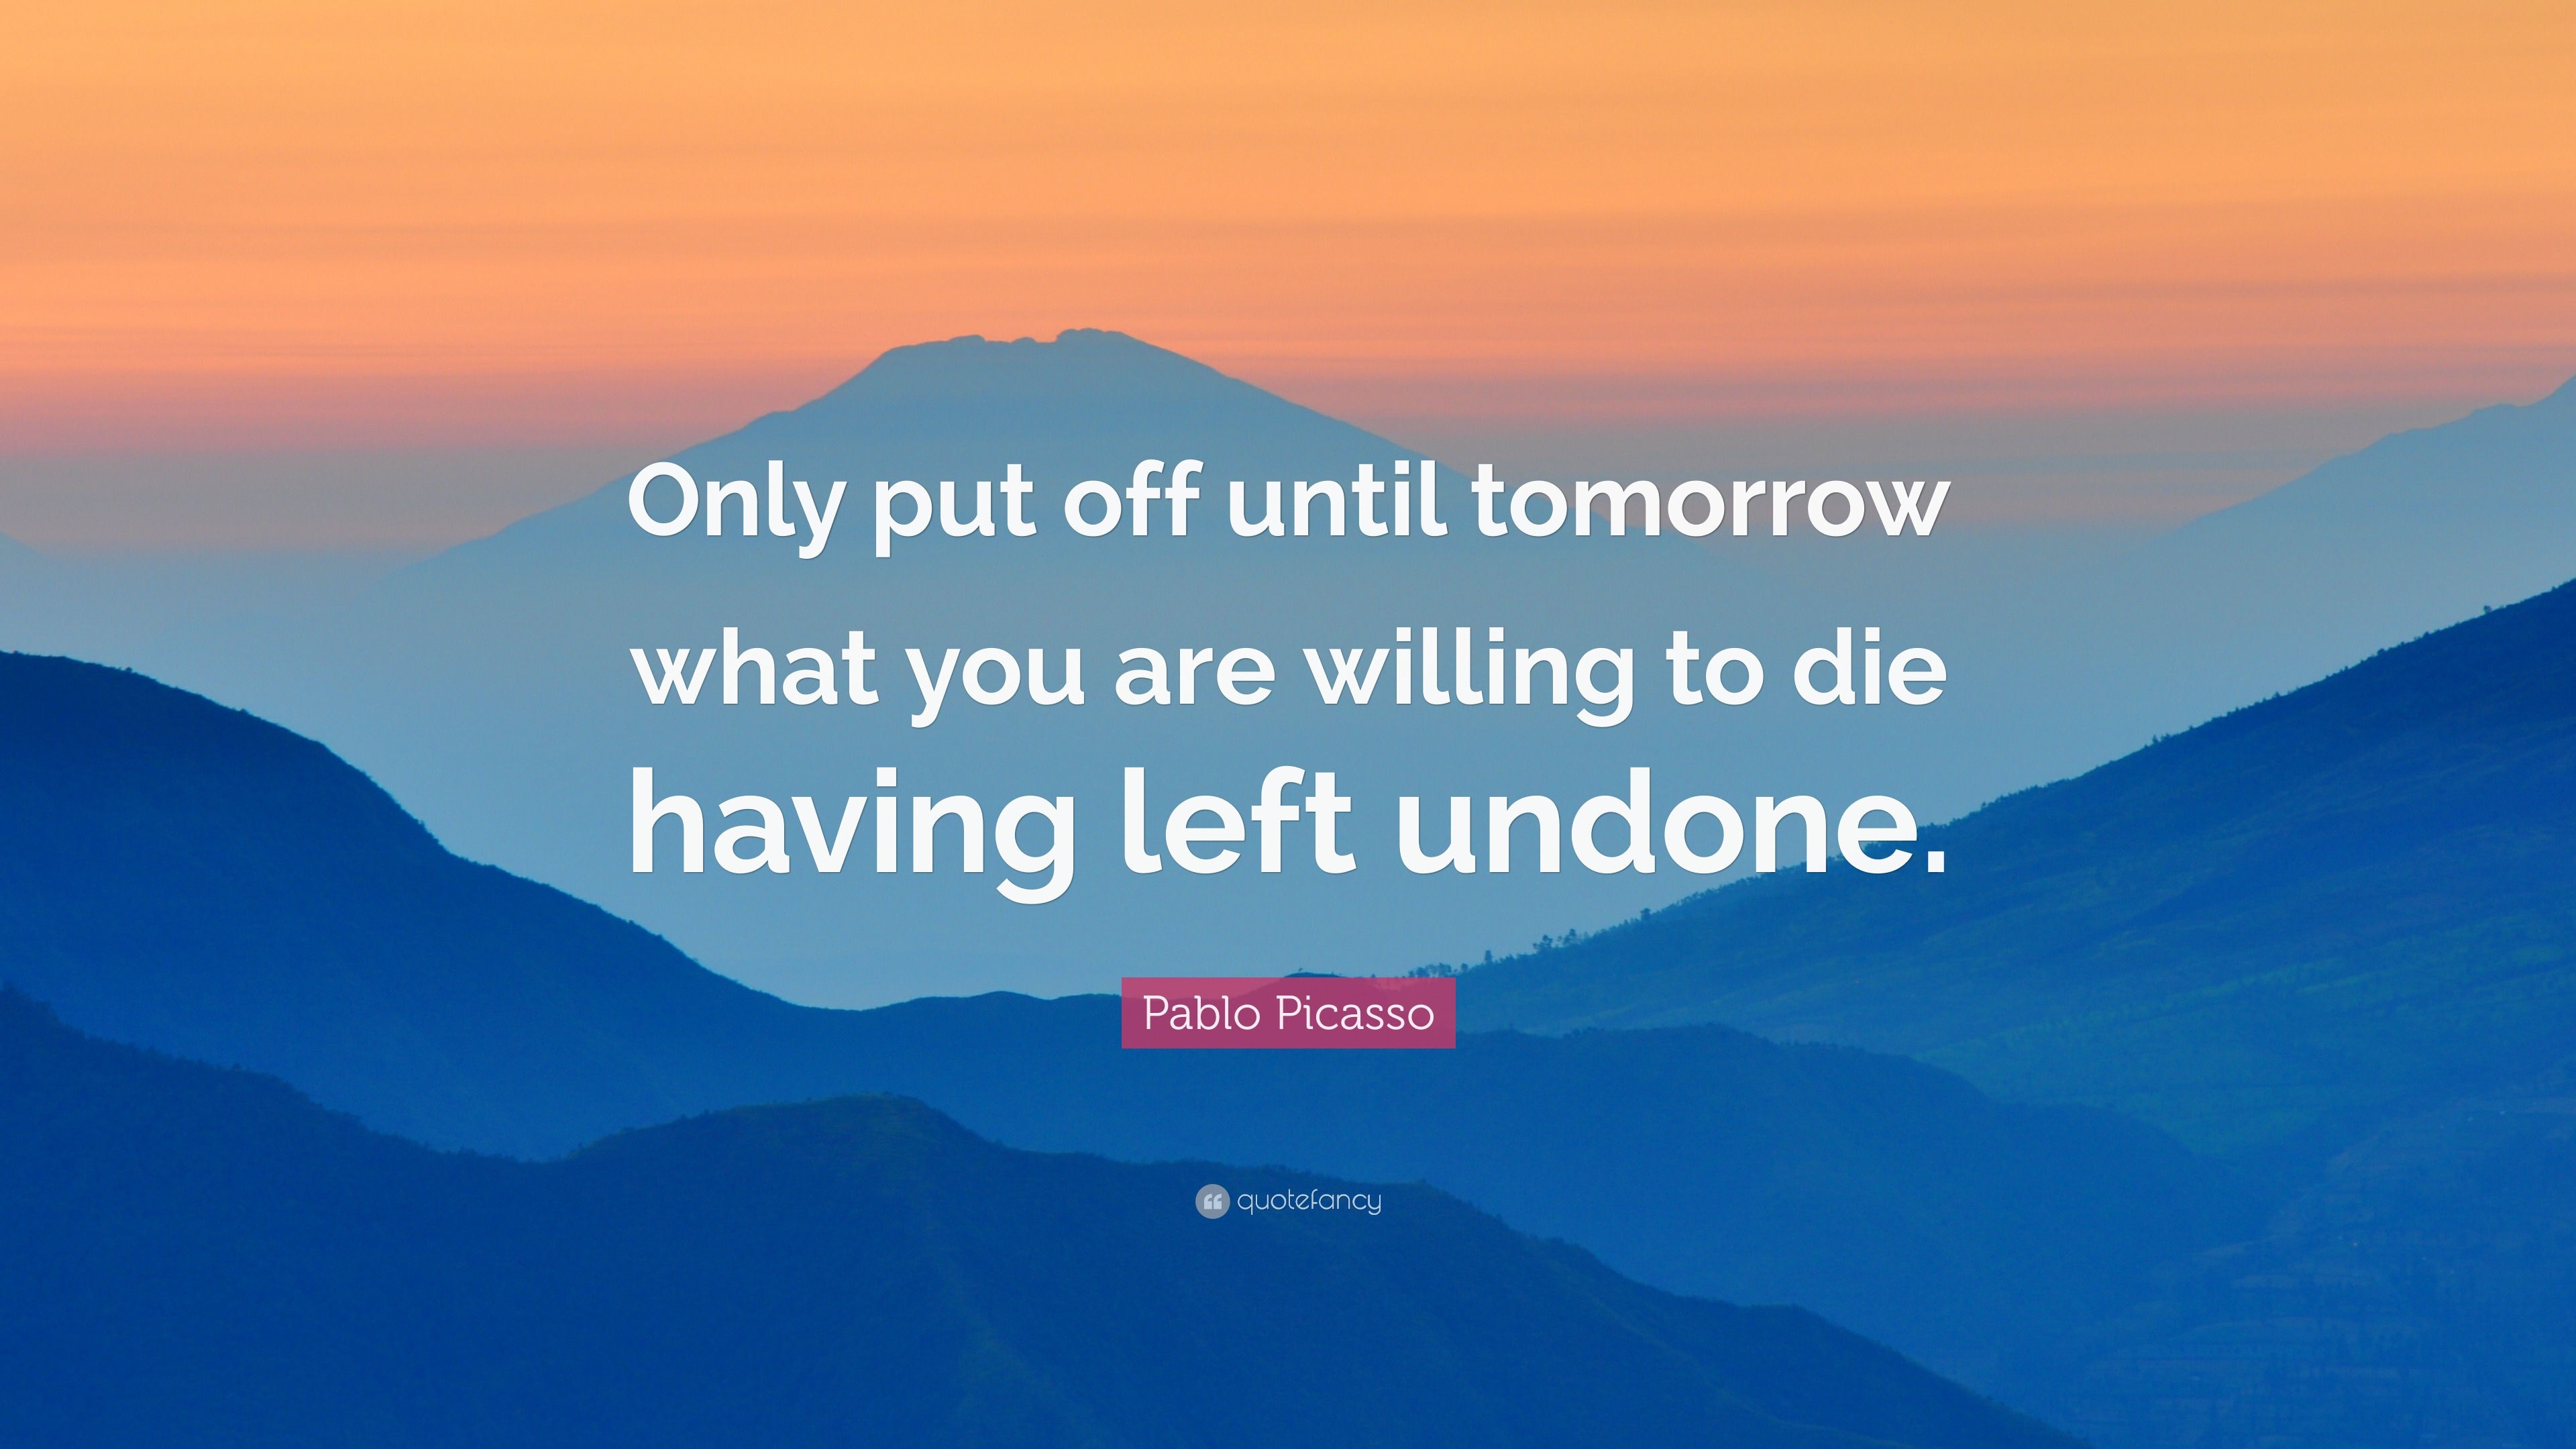 Pablo Picasso Quote: “Only put off until tomorrow what you are willing ...